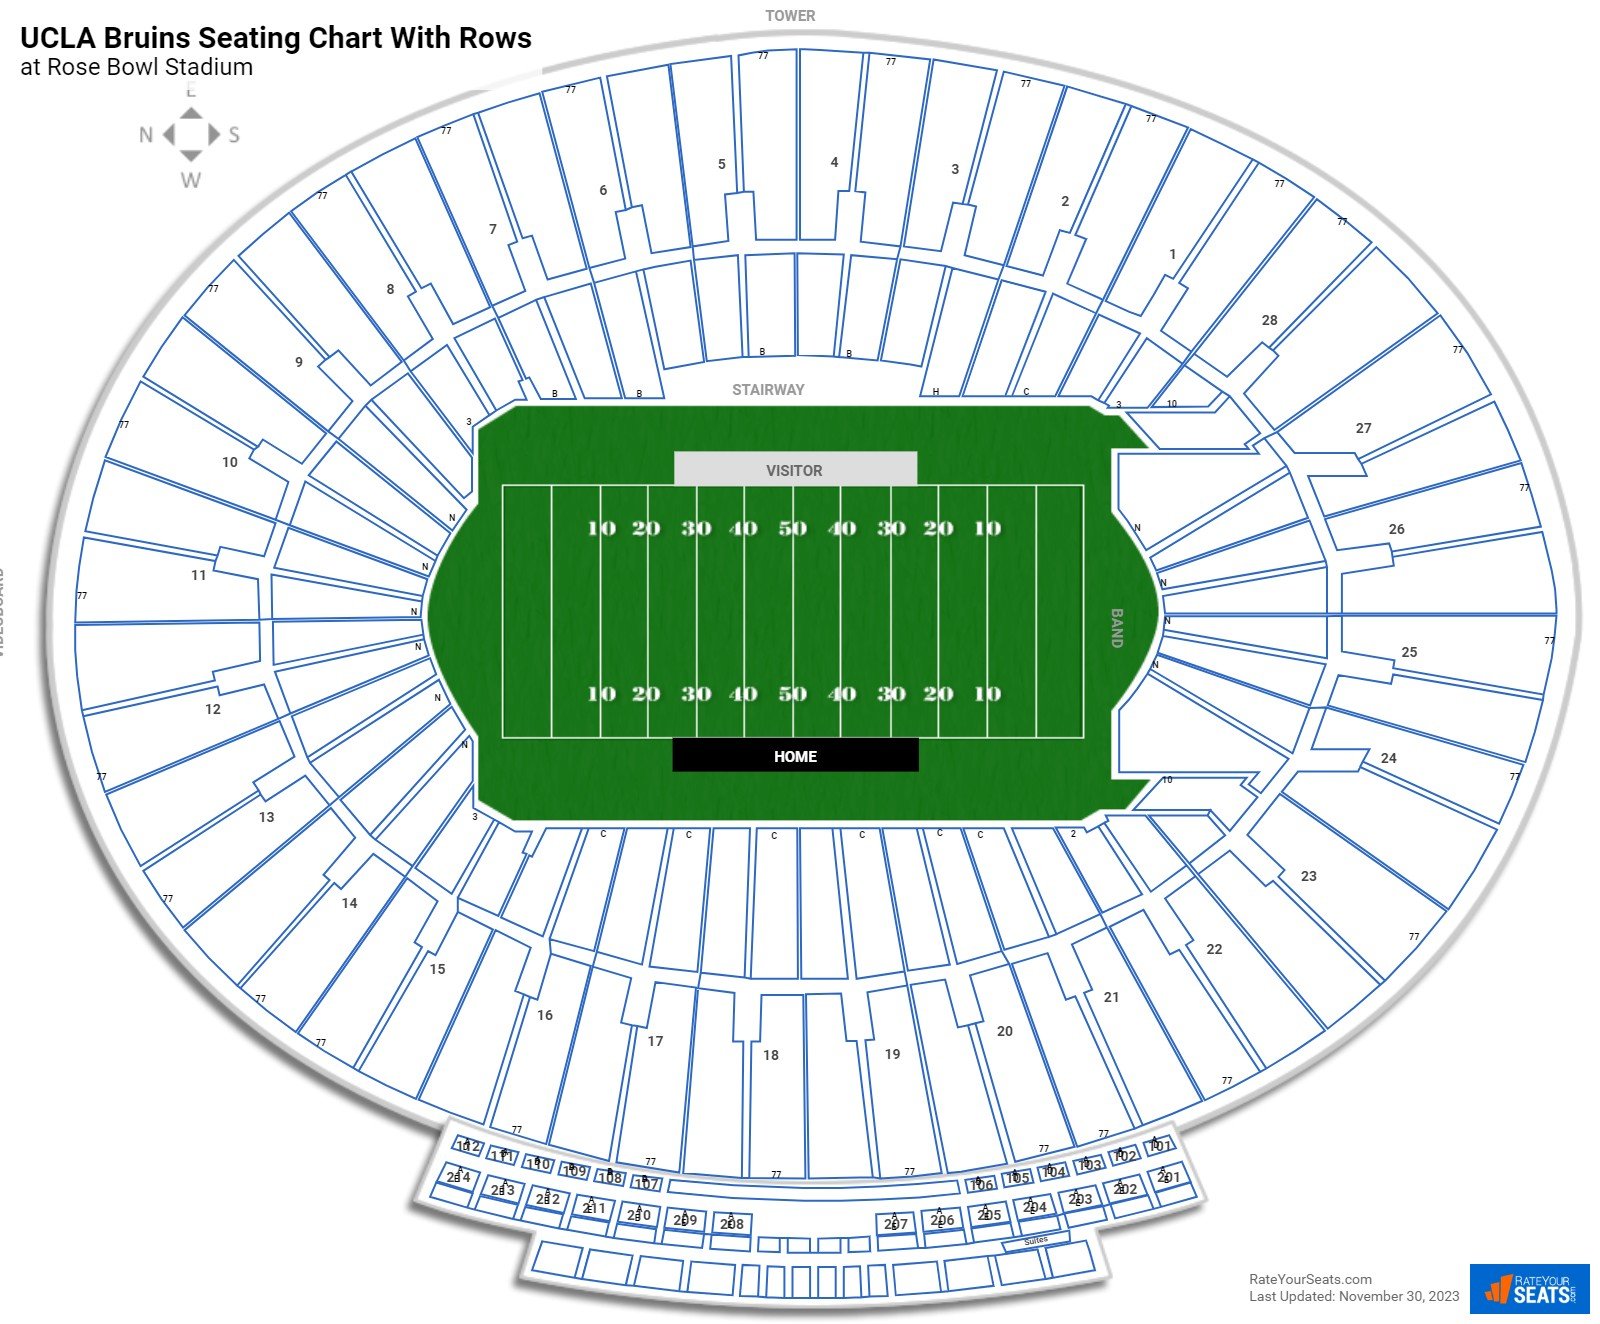 Rose Bowl Stadium seating chart with row numbers